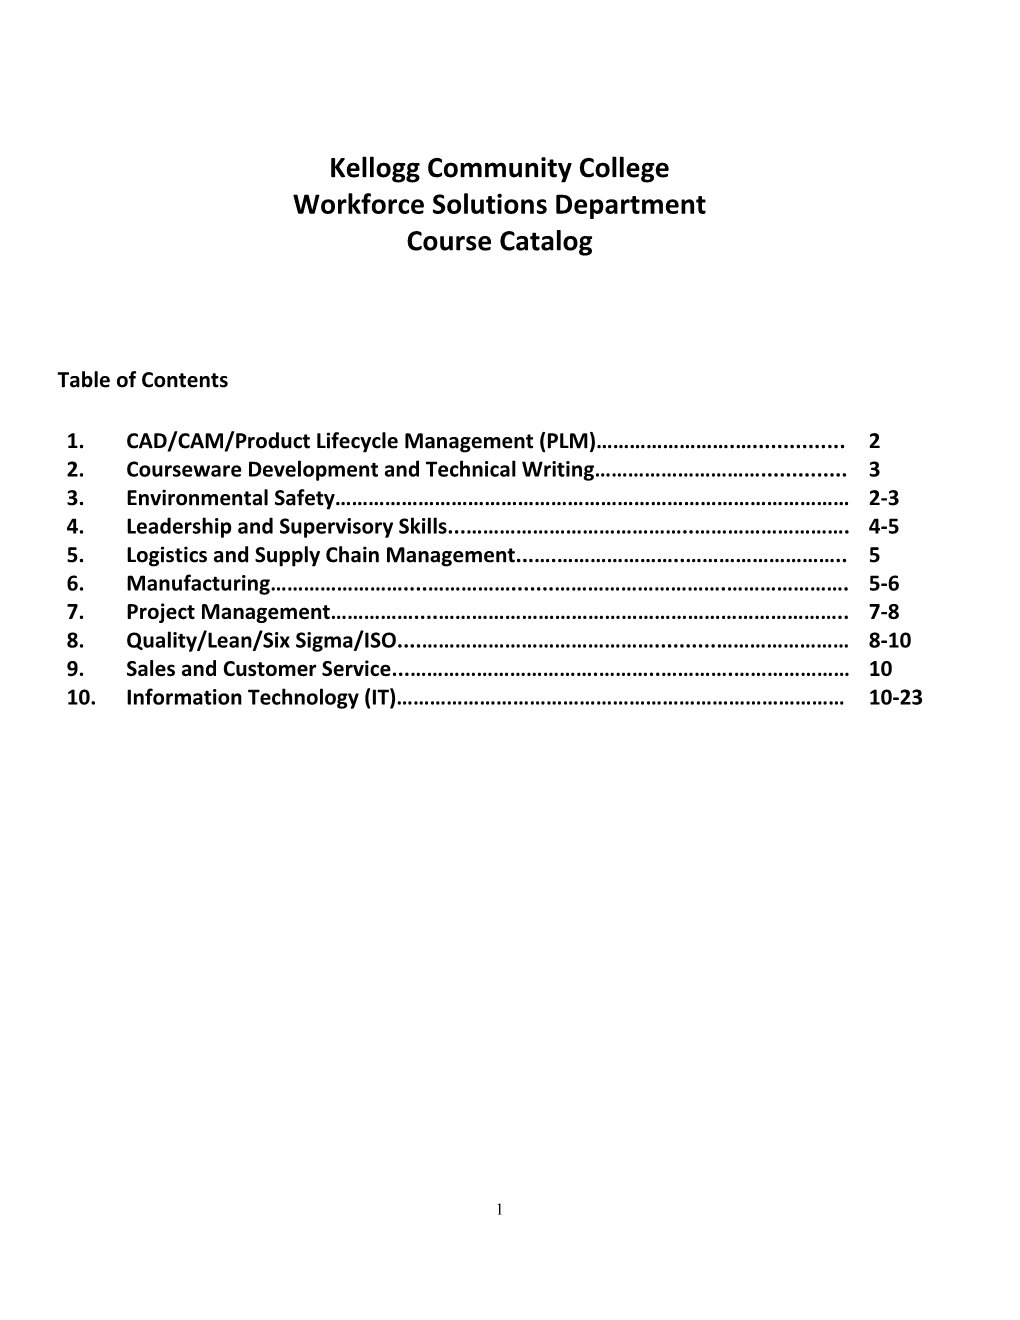 Kellogg Community College Workforce Solutions Department Course Catalog